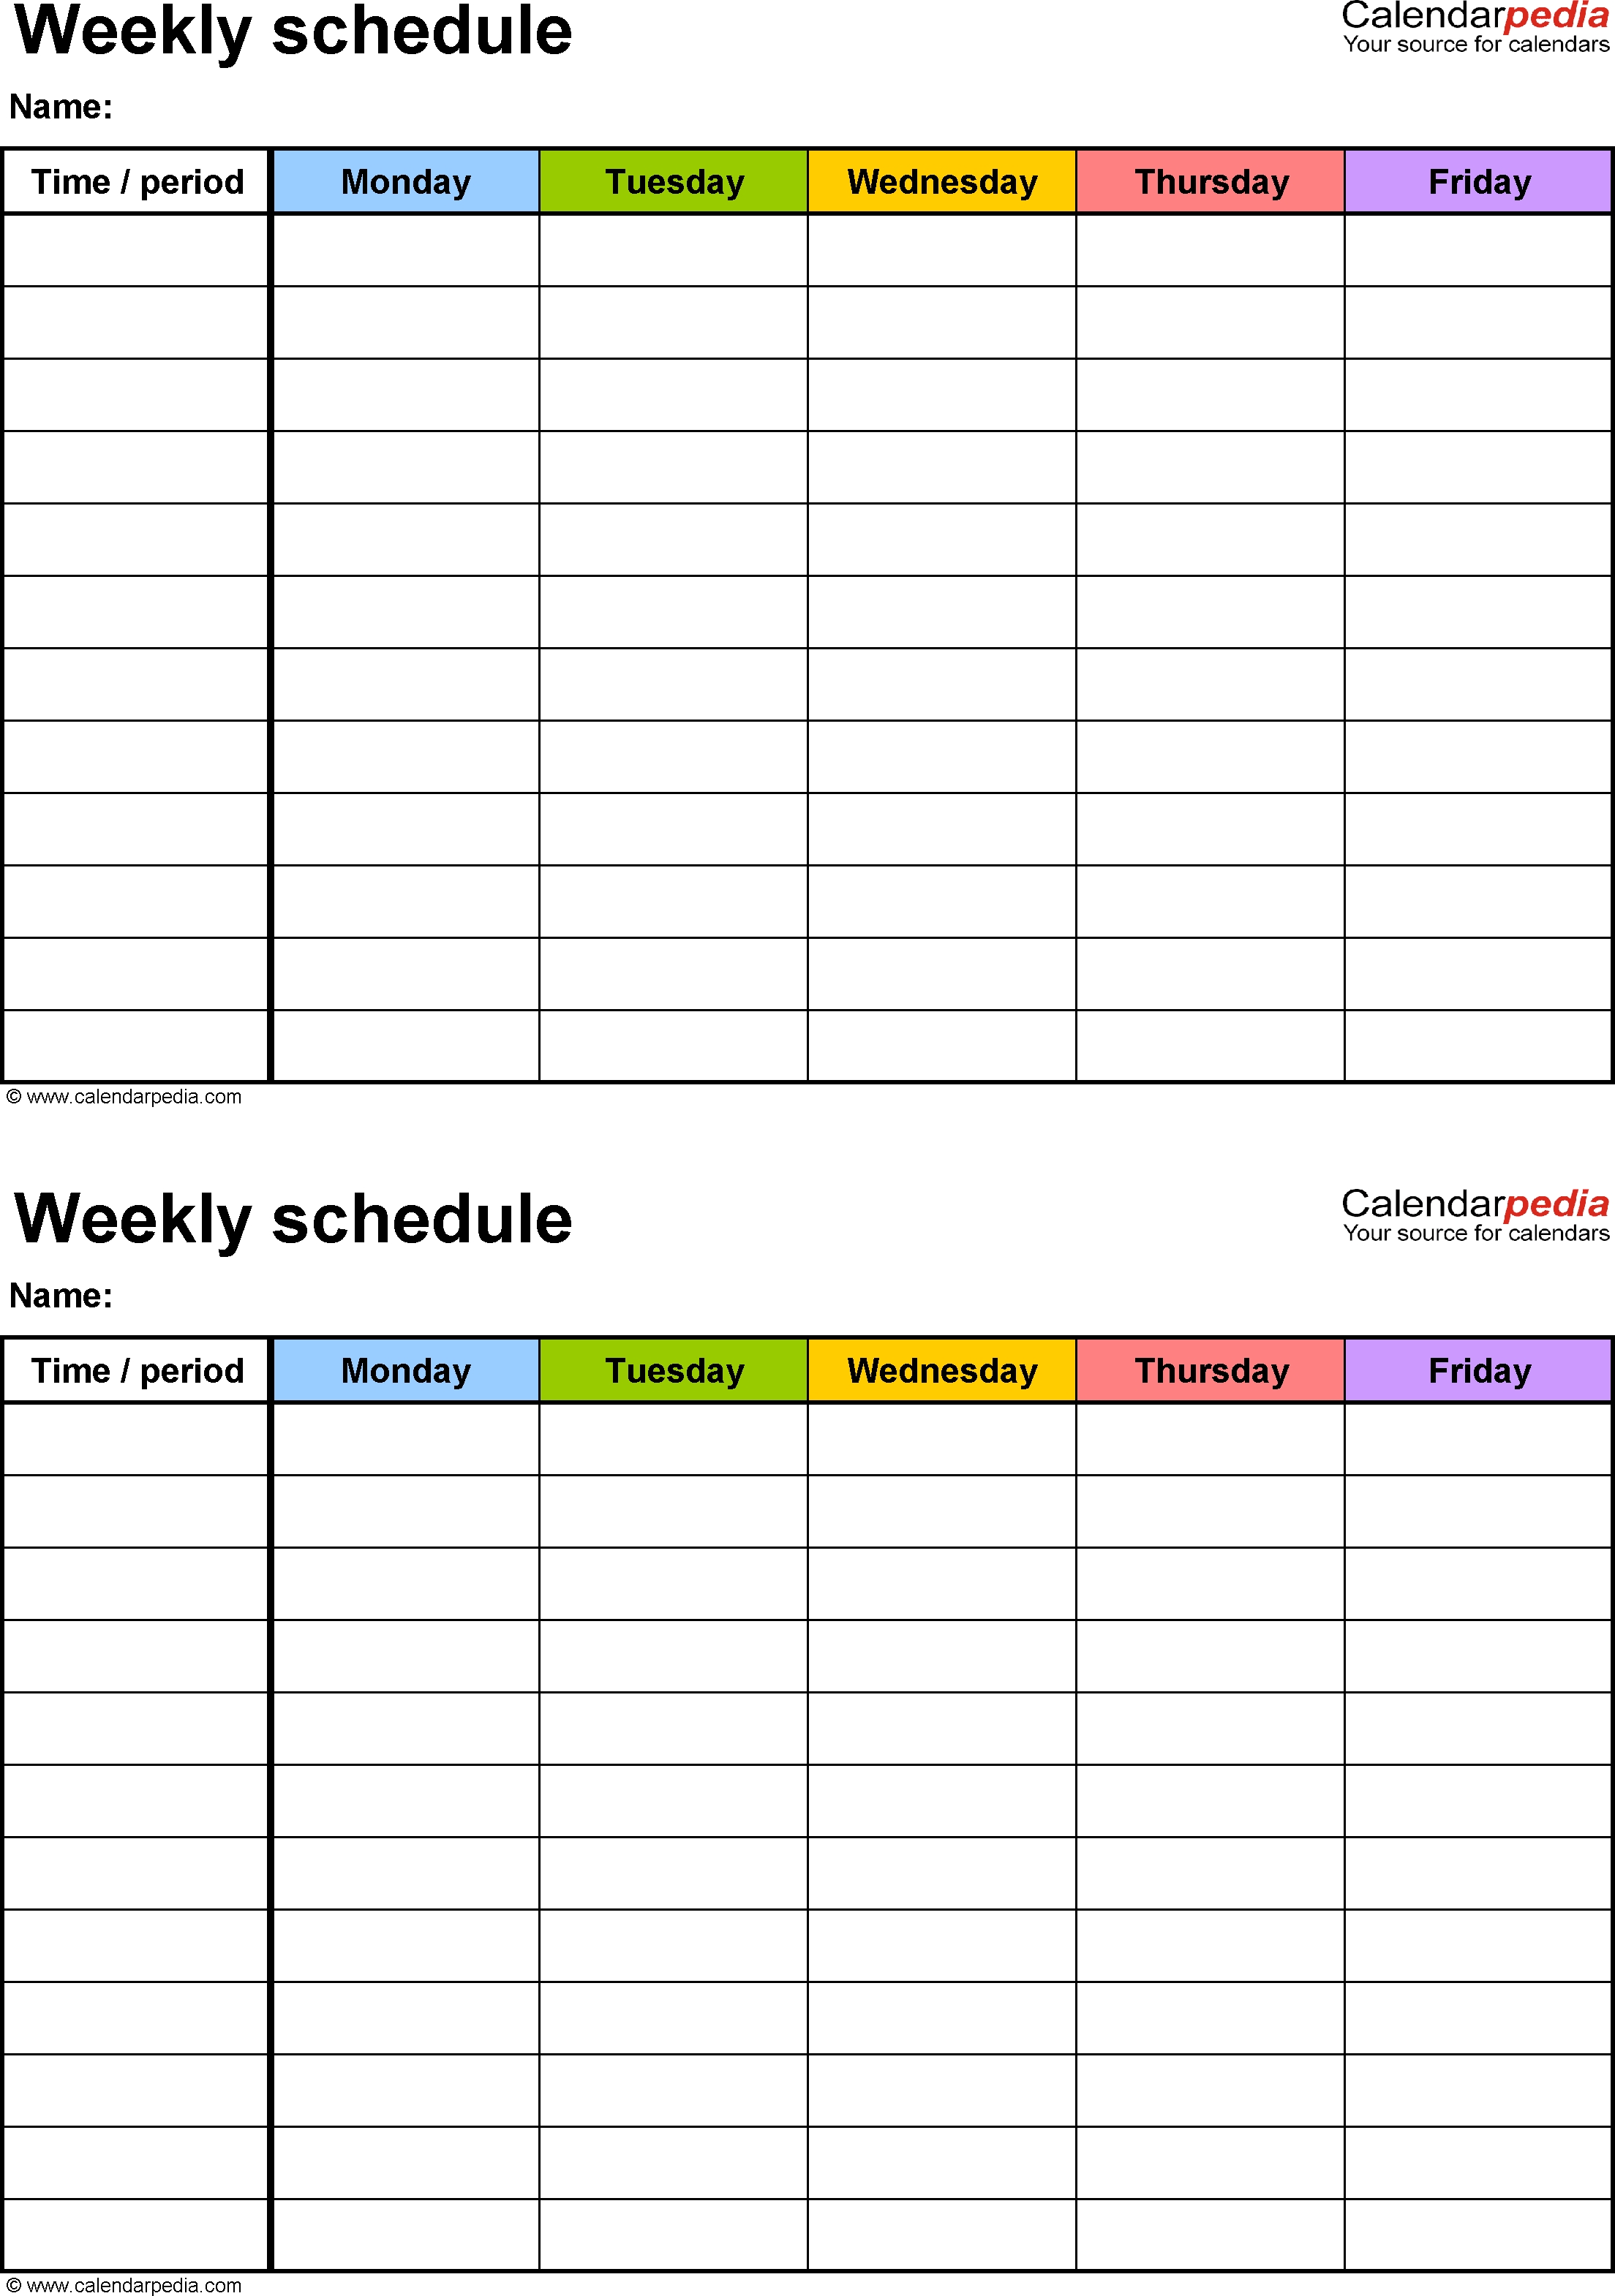 Free Printable Weekly Schedule Templates For Pdf Template | Smorad inside Blank Weekly Schedule Template Printable